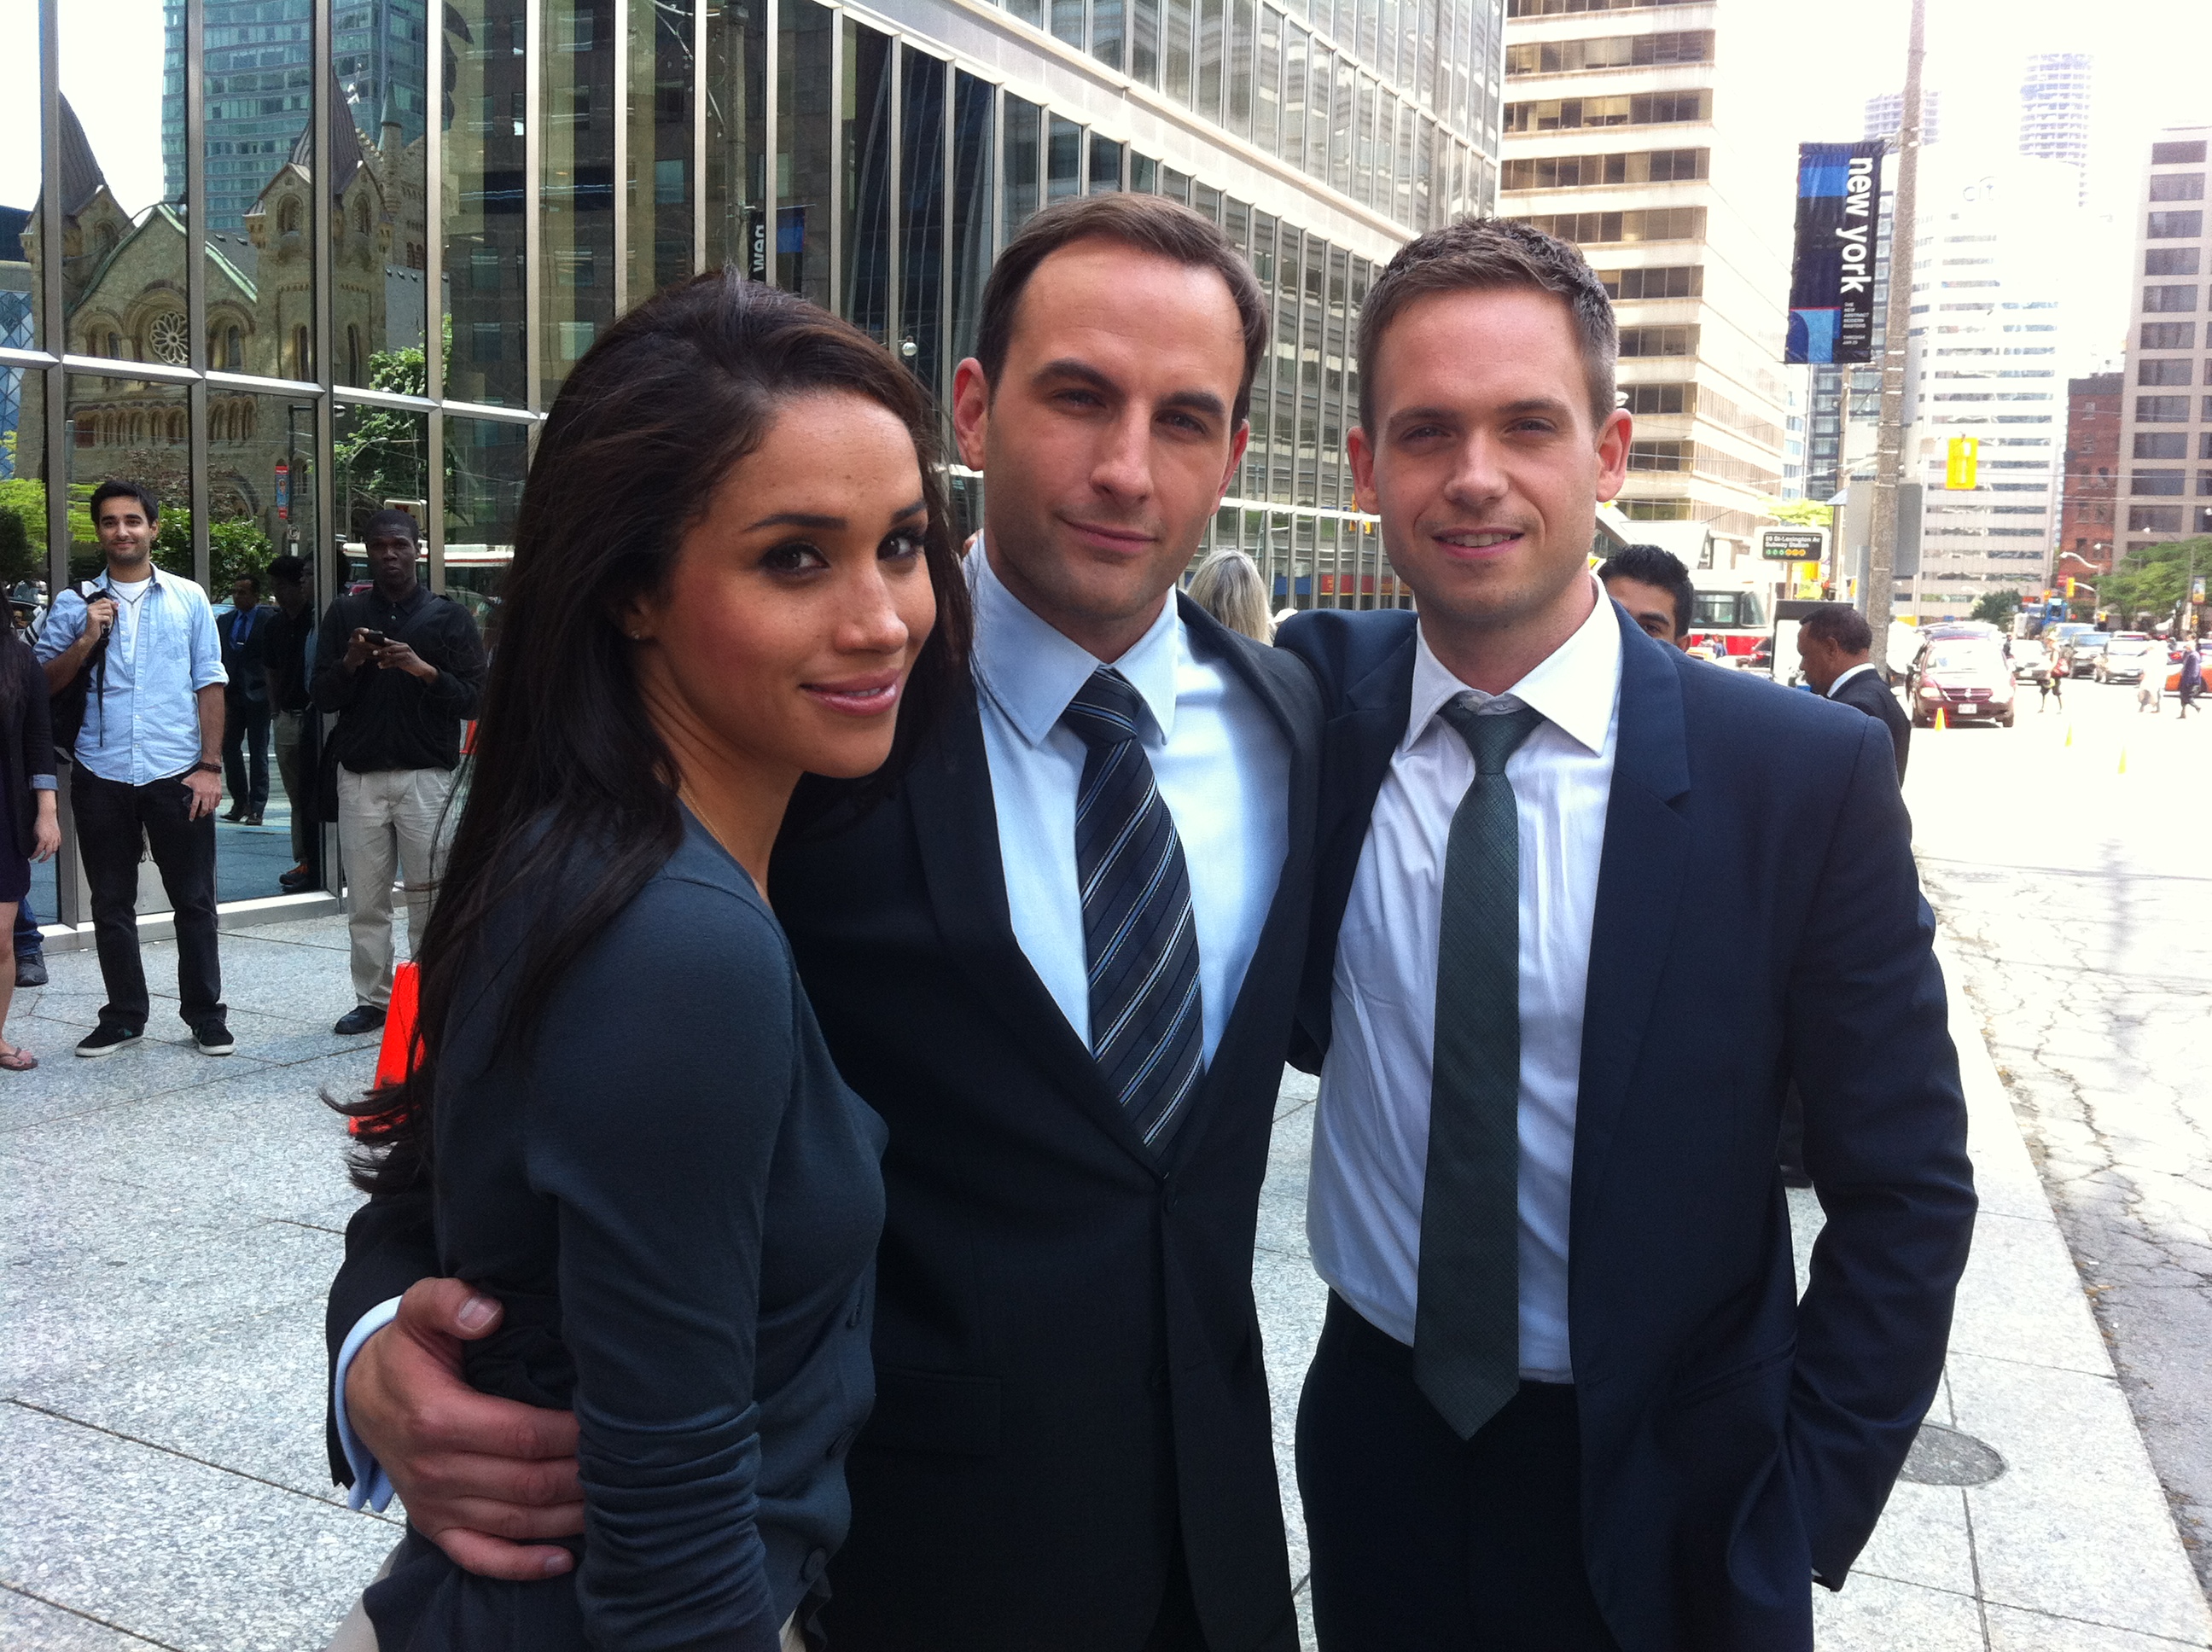 On location of USA Network's, SUITS